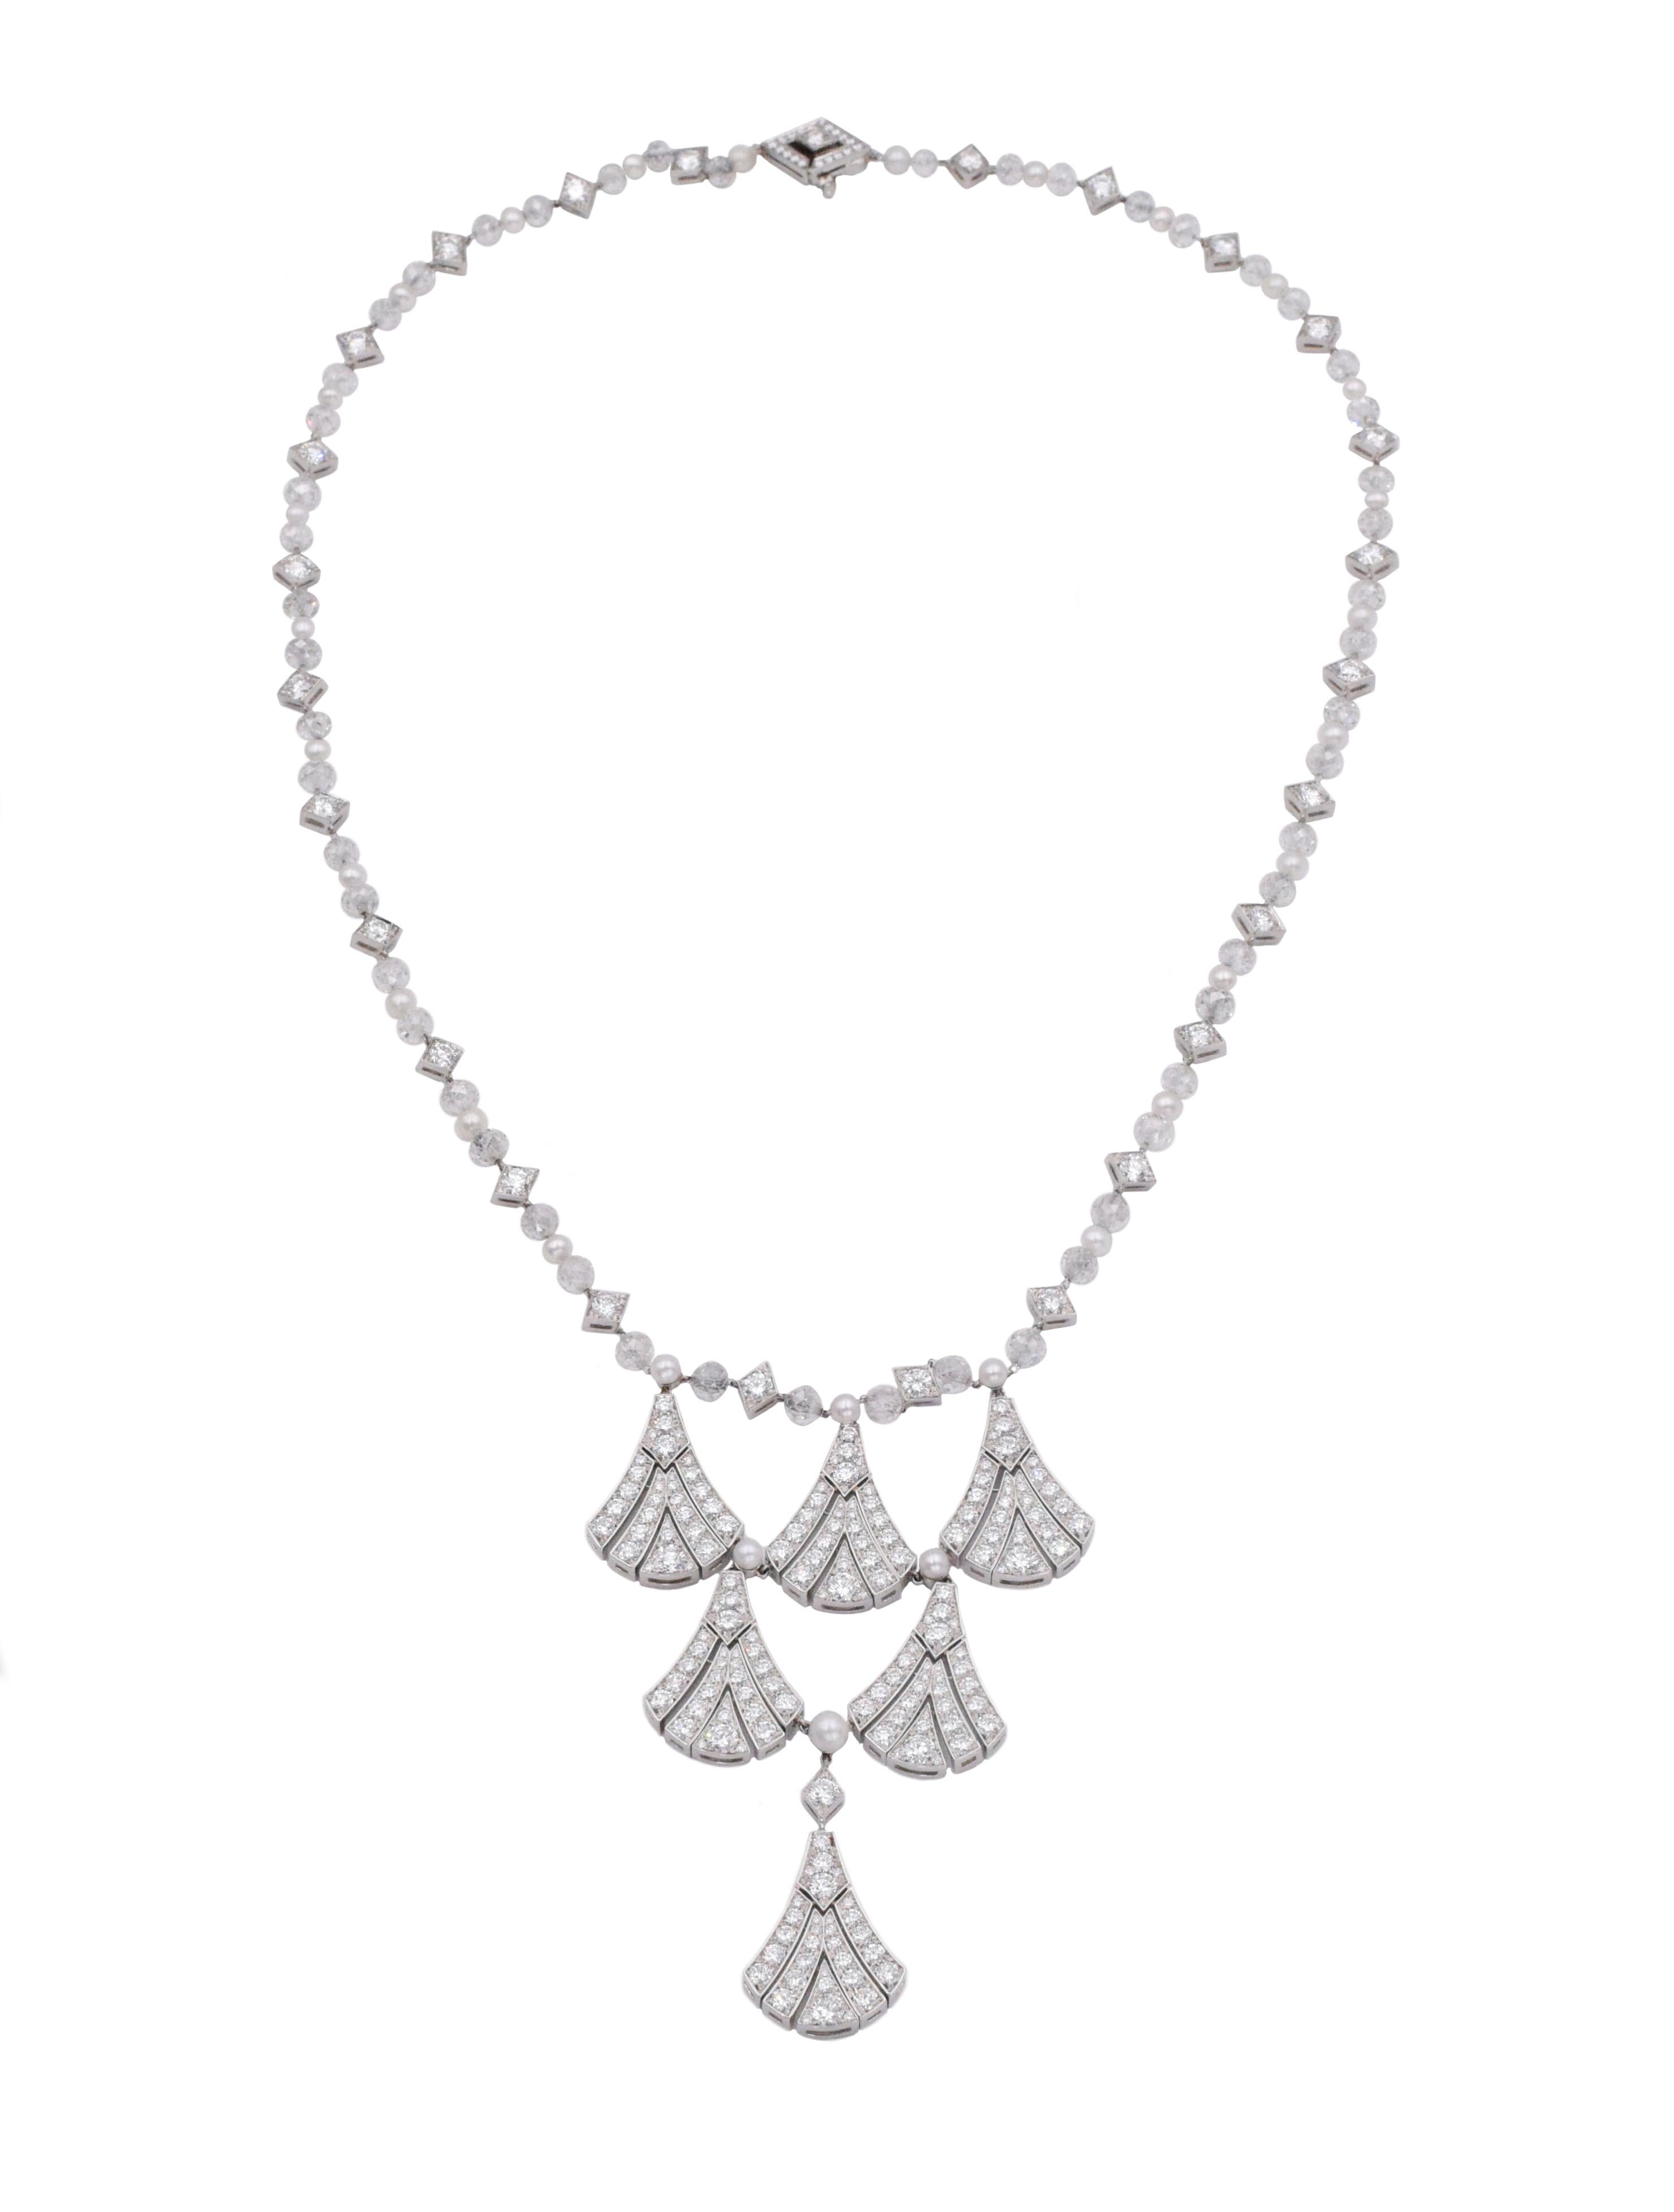 Tiffany & Co. Diamond and Pearl Necklace 2